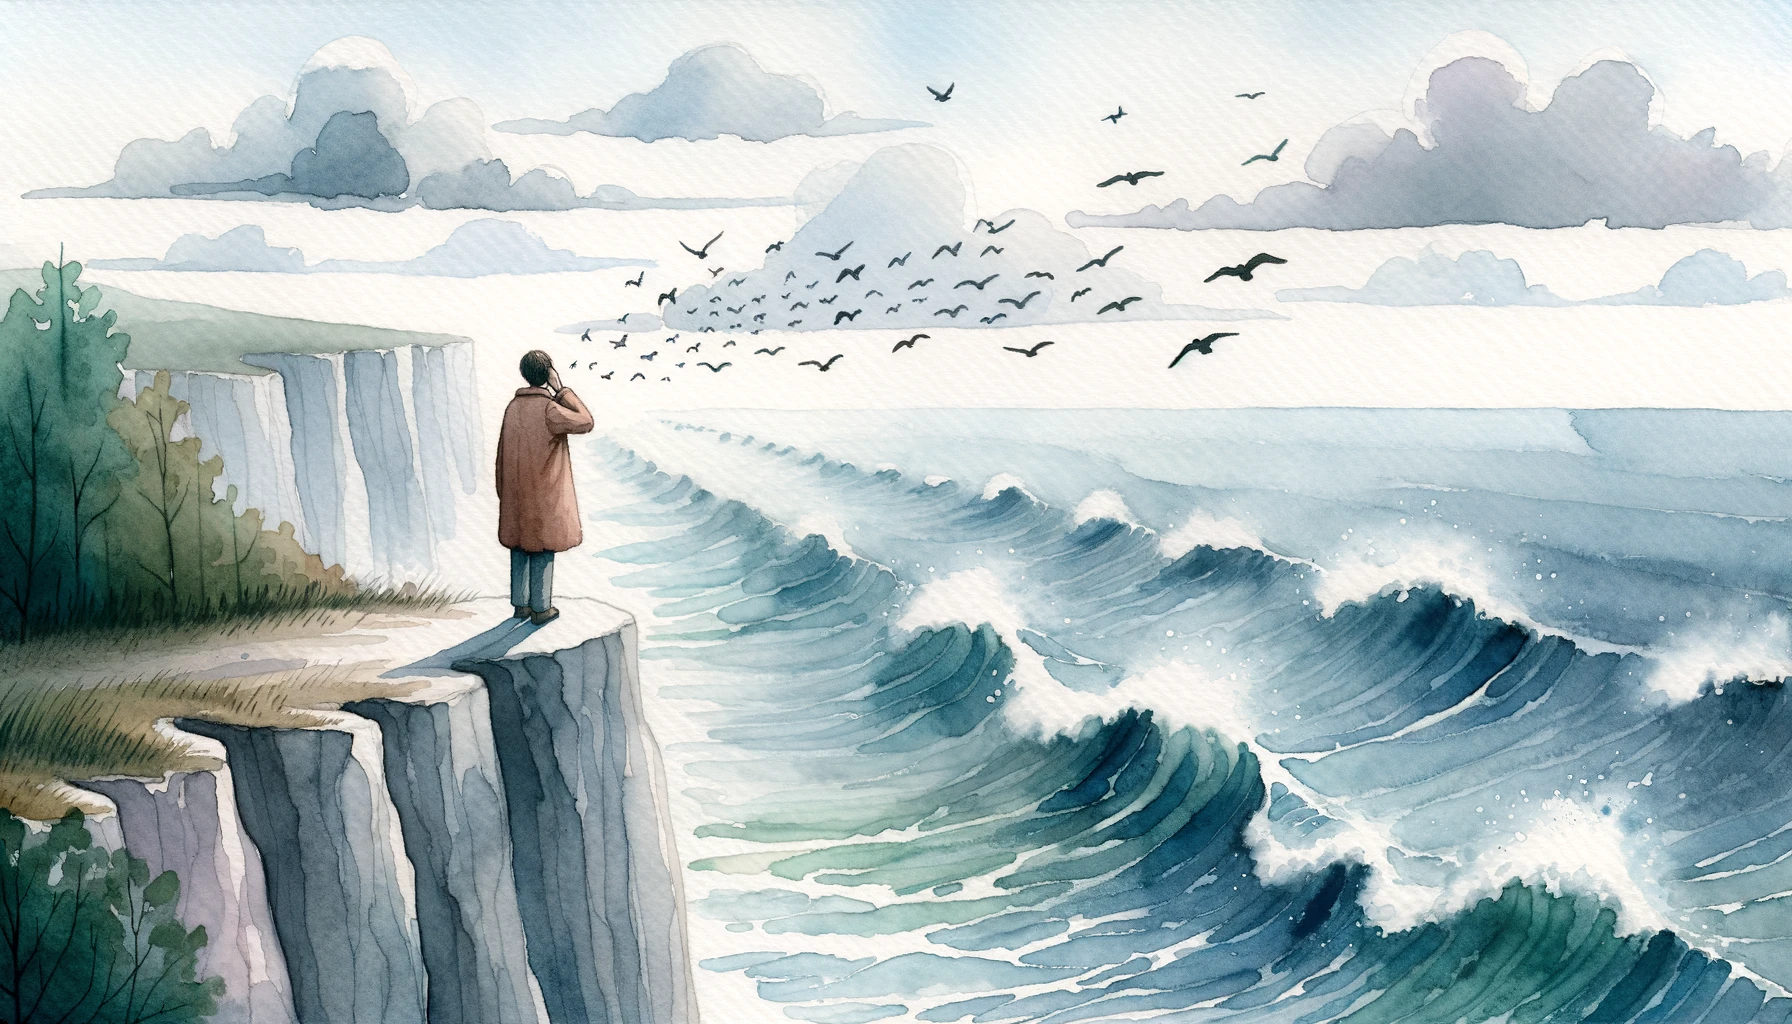 Person standing at the edge of a cliff, looking out at a vast ocean. Birds fly overhead, and a gentle breeze stirs the air.